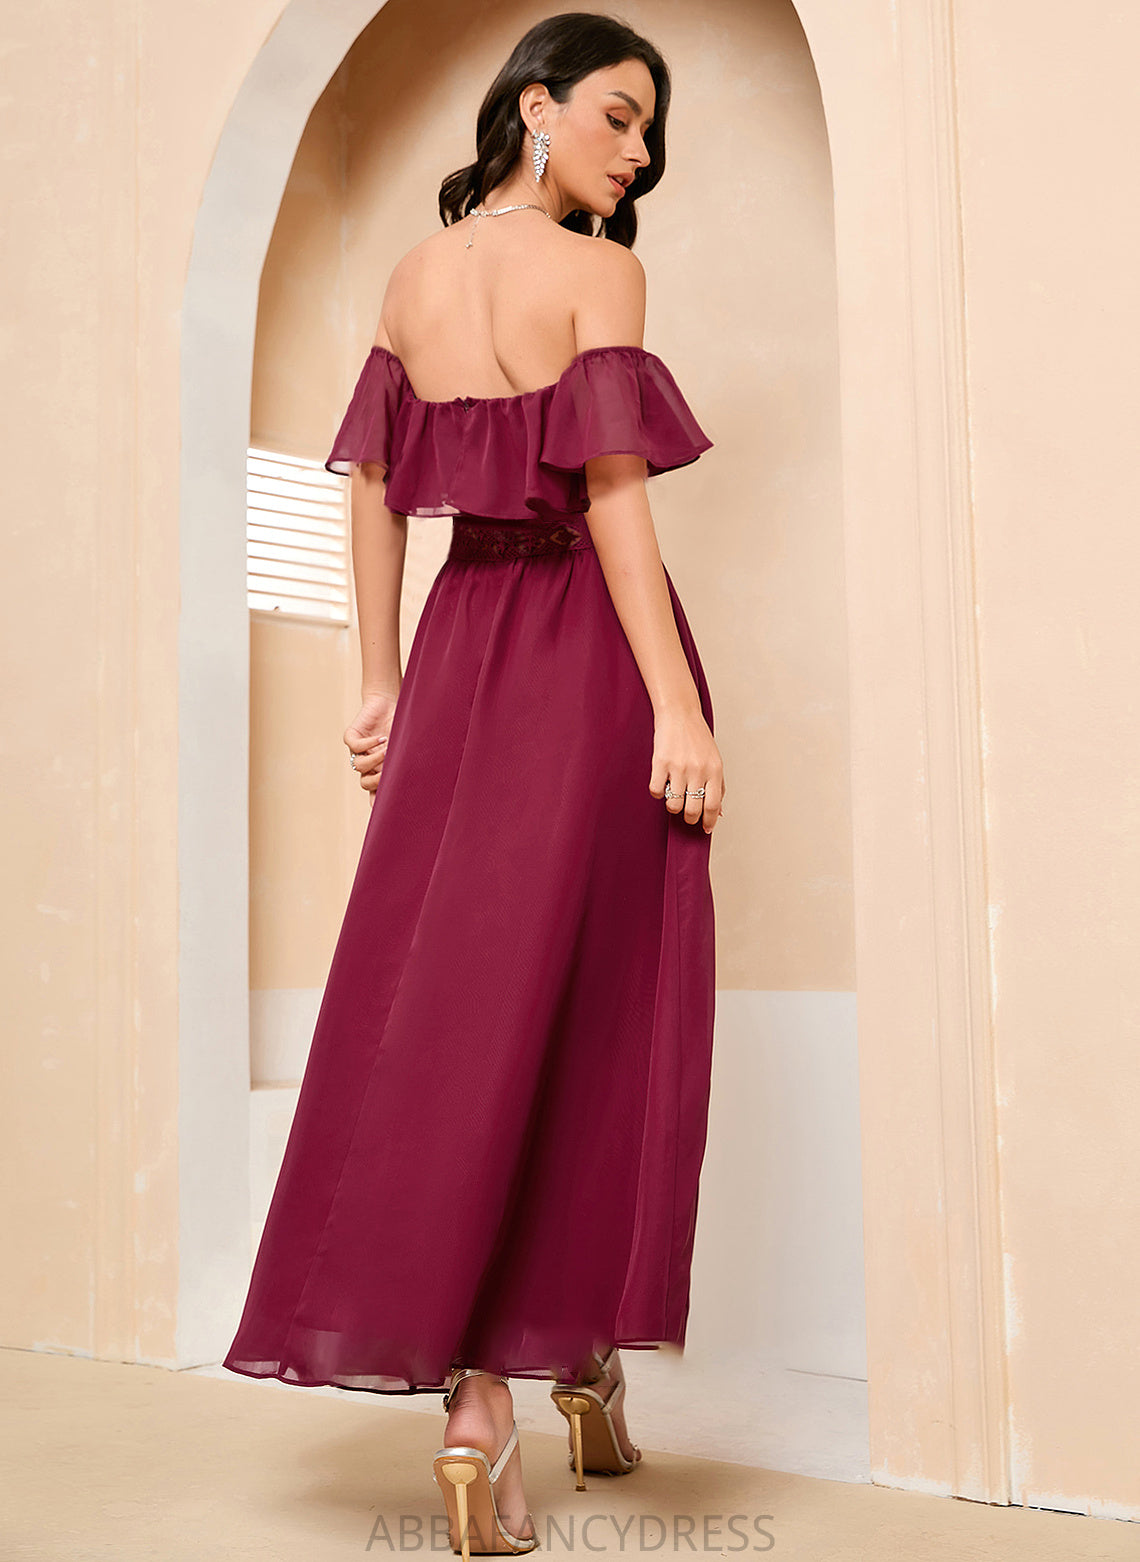 Prom Dresses With Ankle-Length Off-the-Shoulder A-Line Front Carla Split